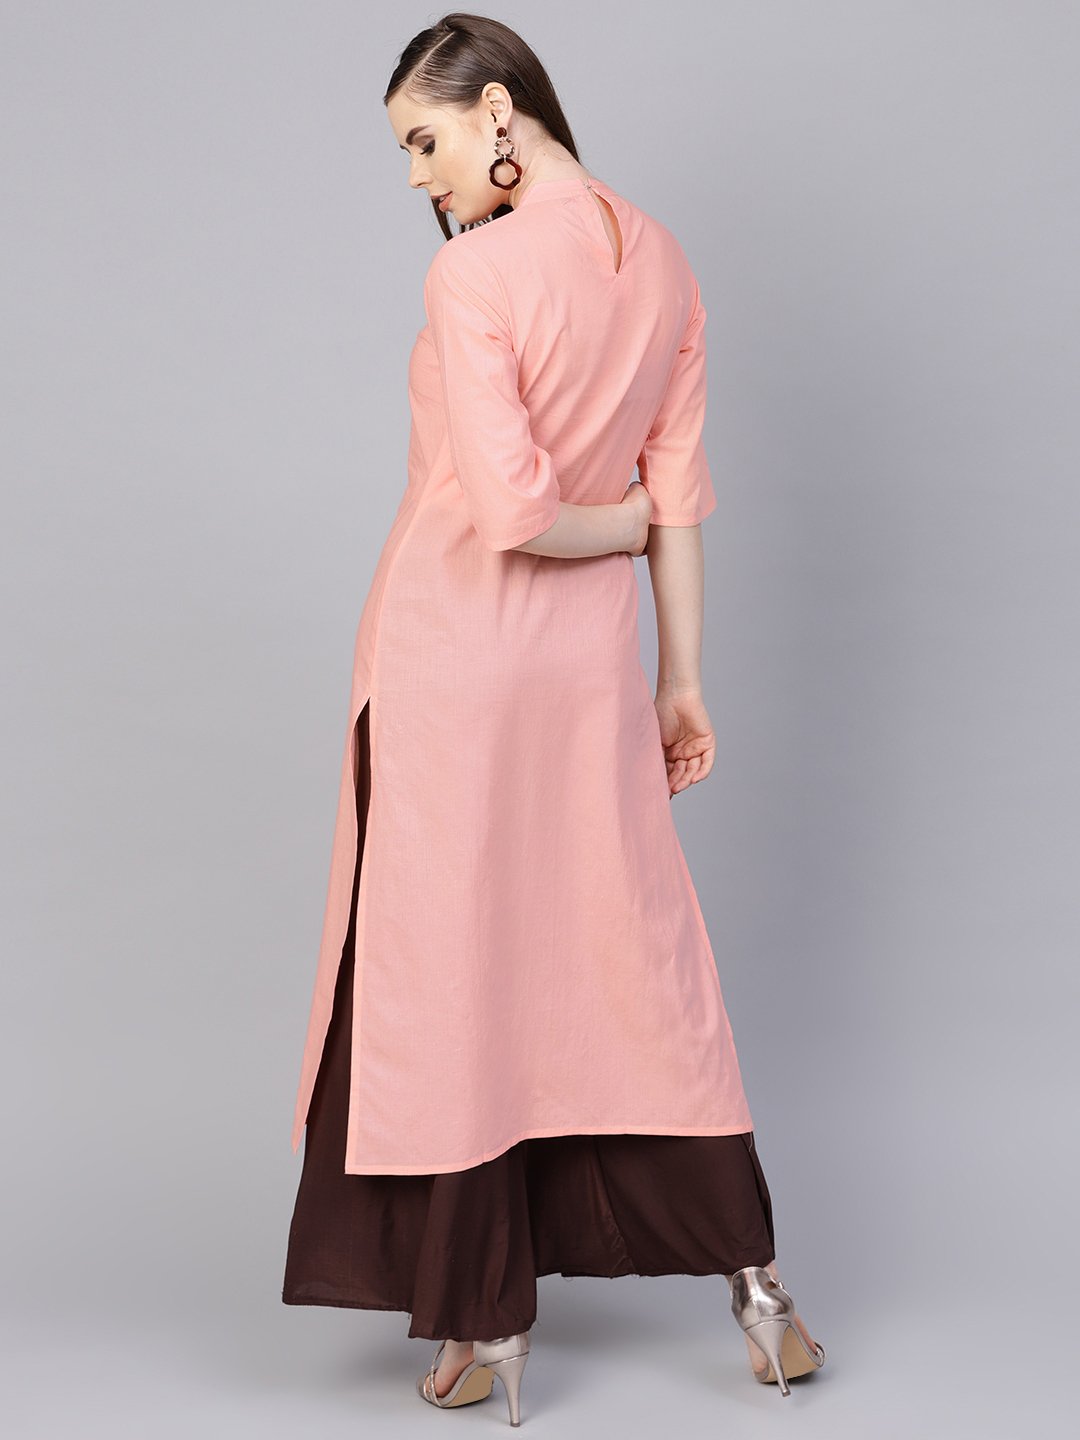 Women's Solid Peach Kurta With Closed Collar And Pleats In Yoke - Nayo Clothing